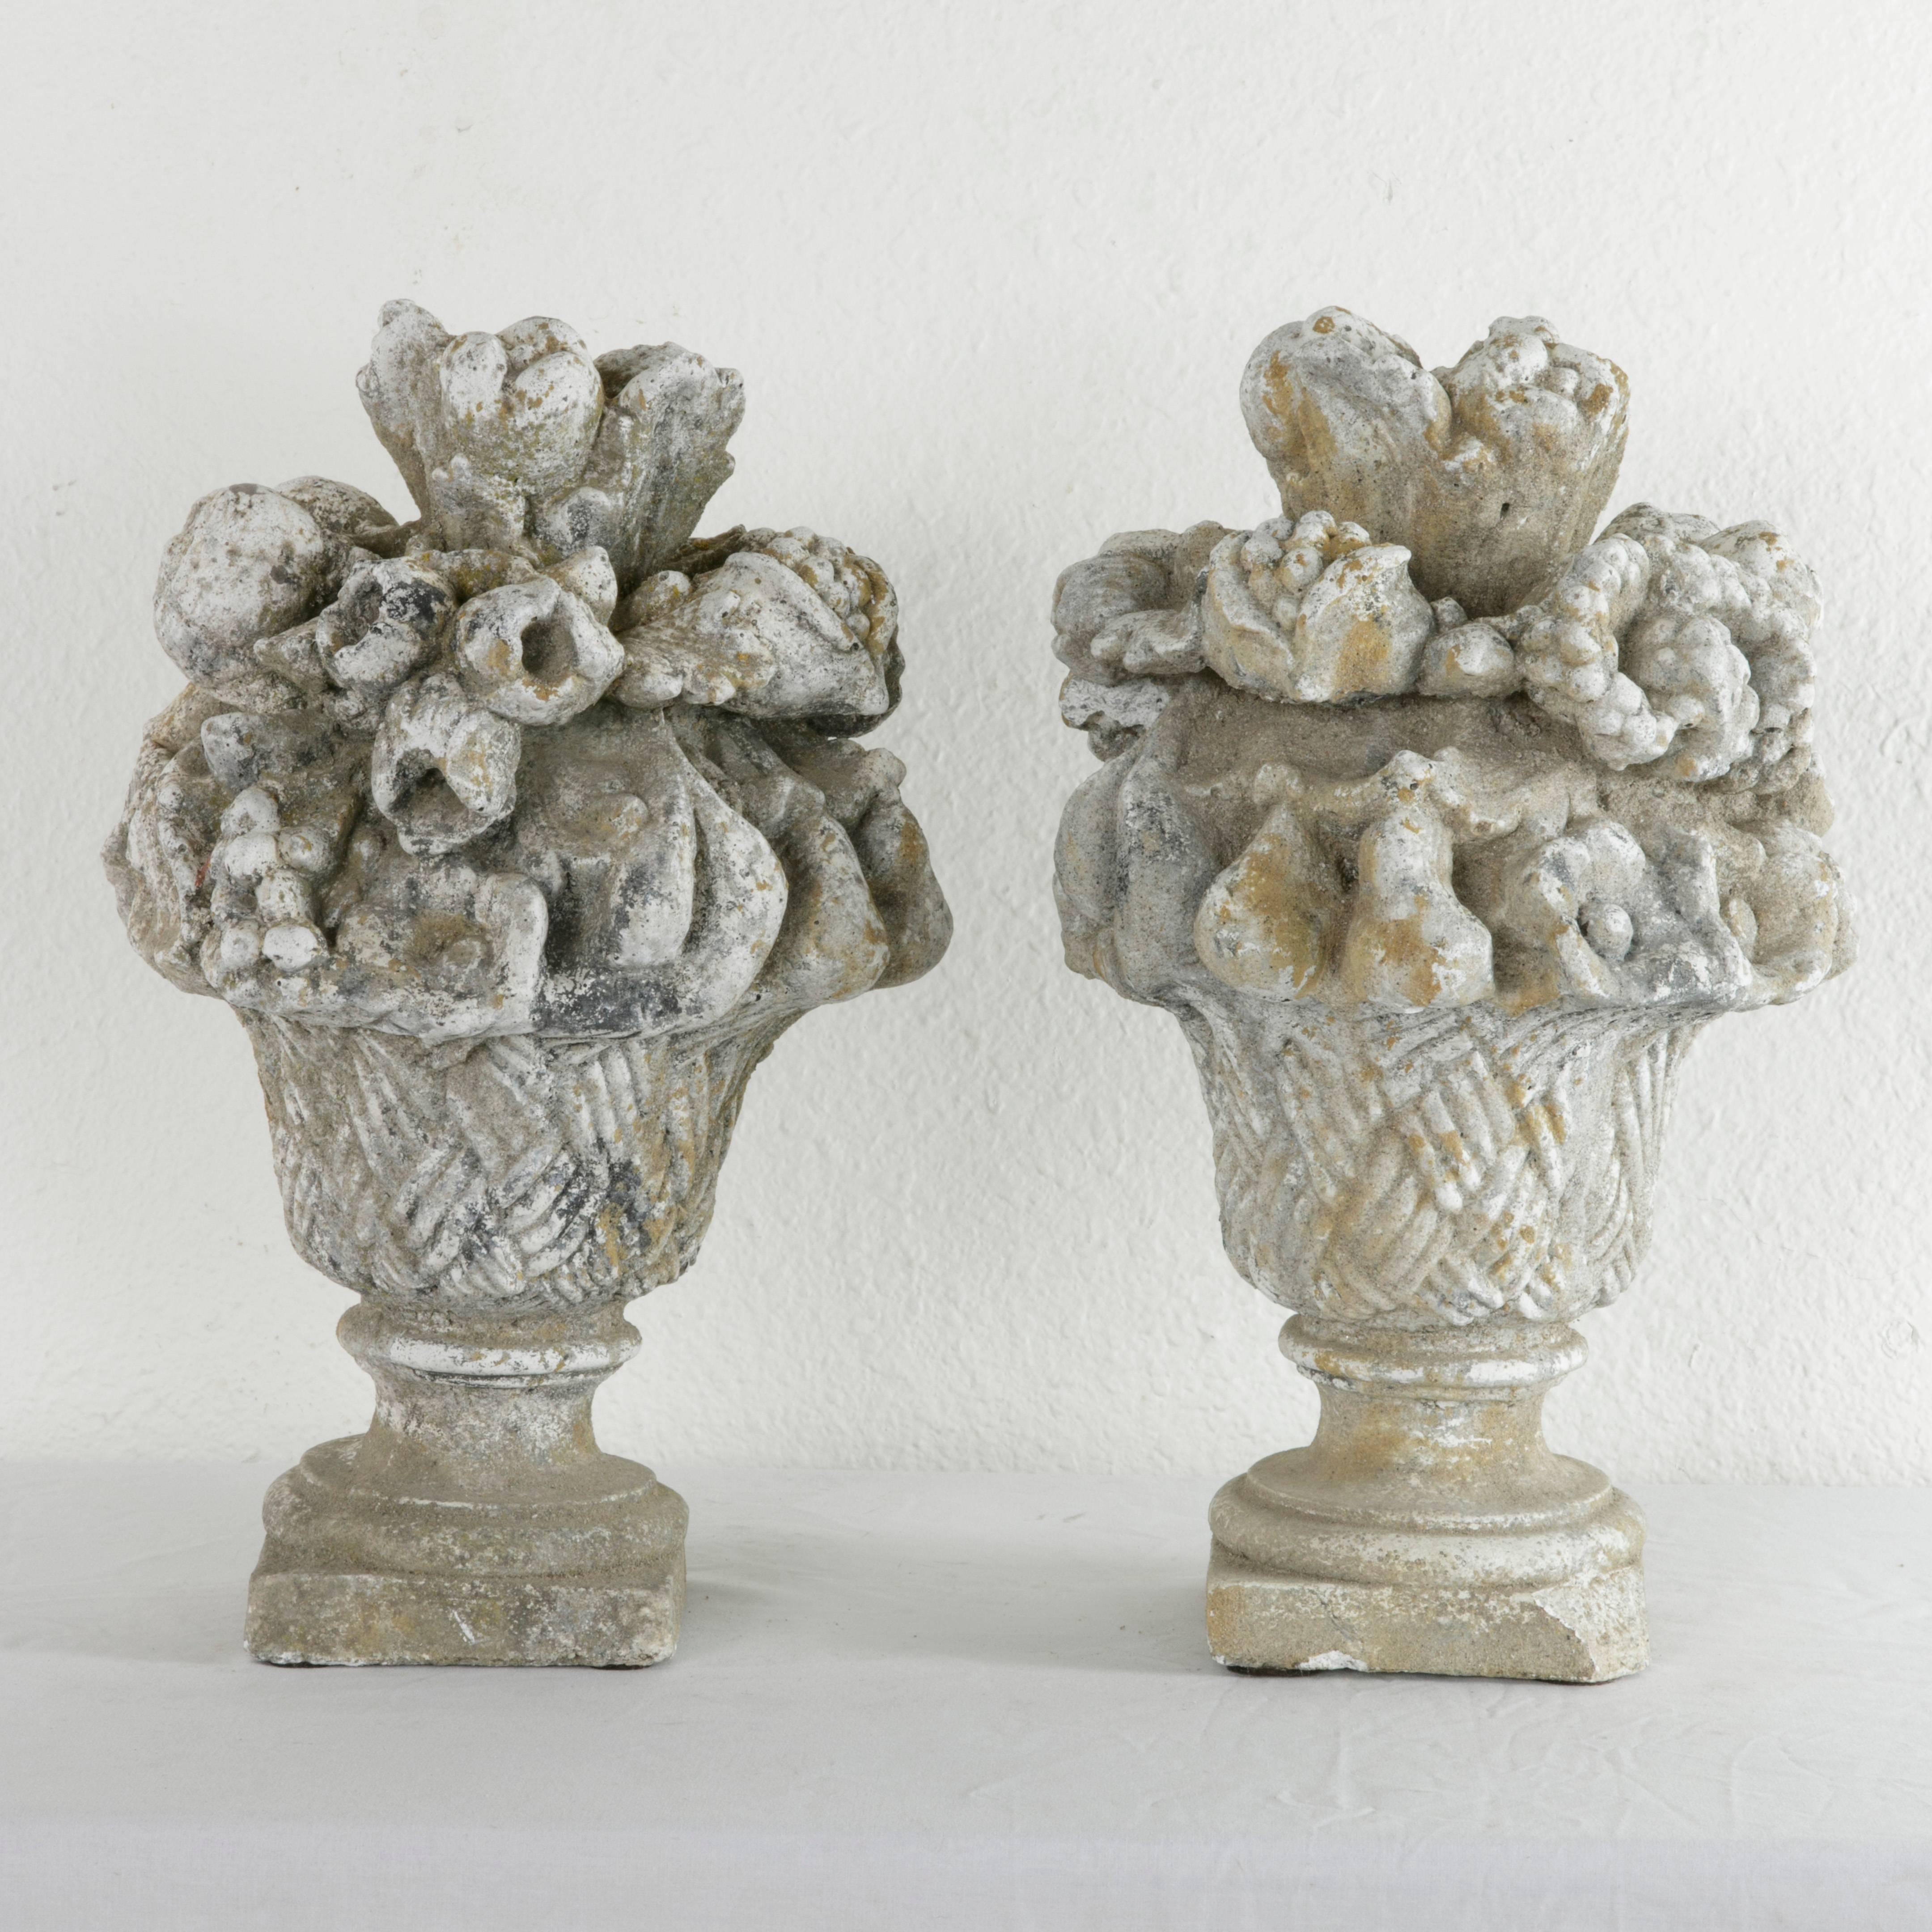 Early 20th Century Pair of French Stone Sculptures with Bouquets of Fruit, circa 1900